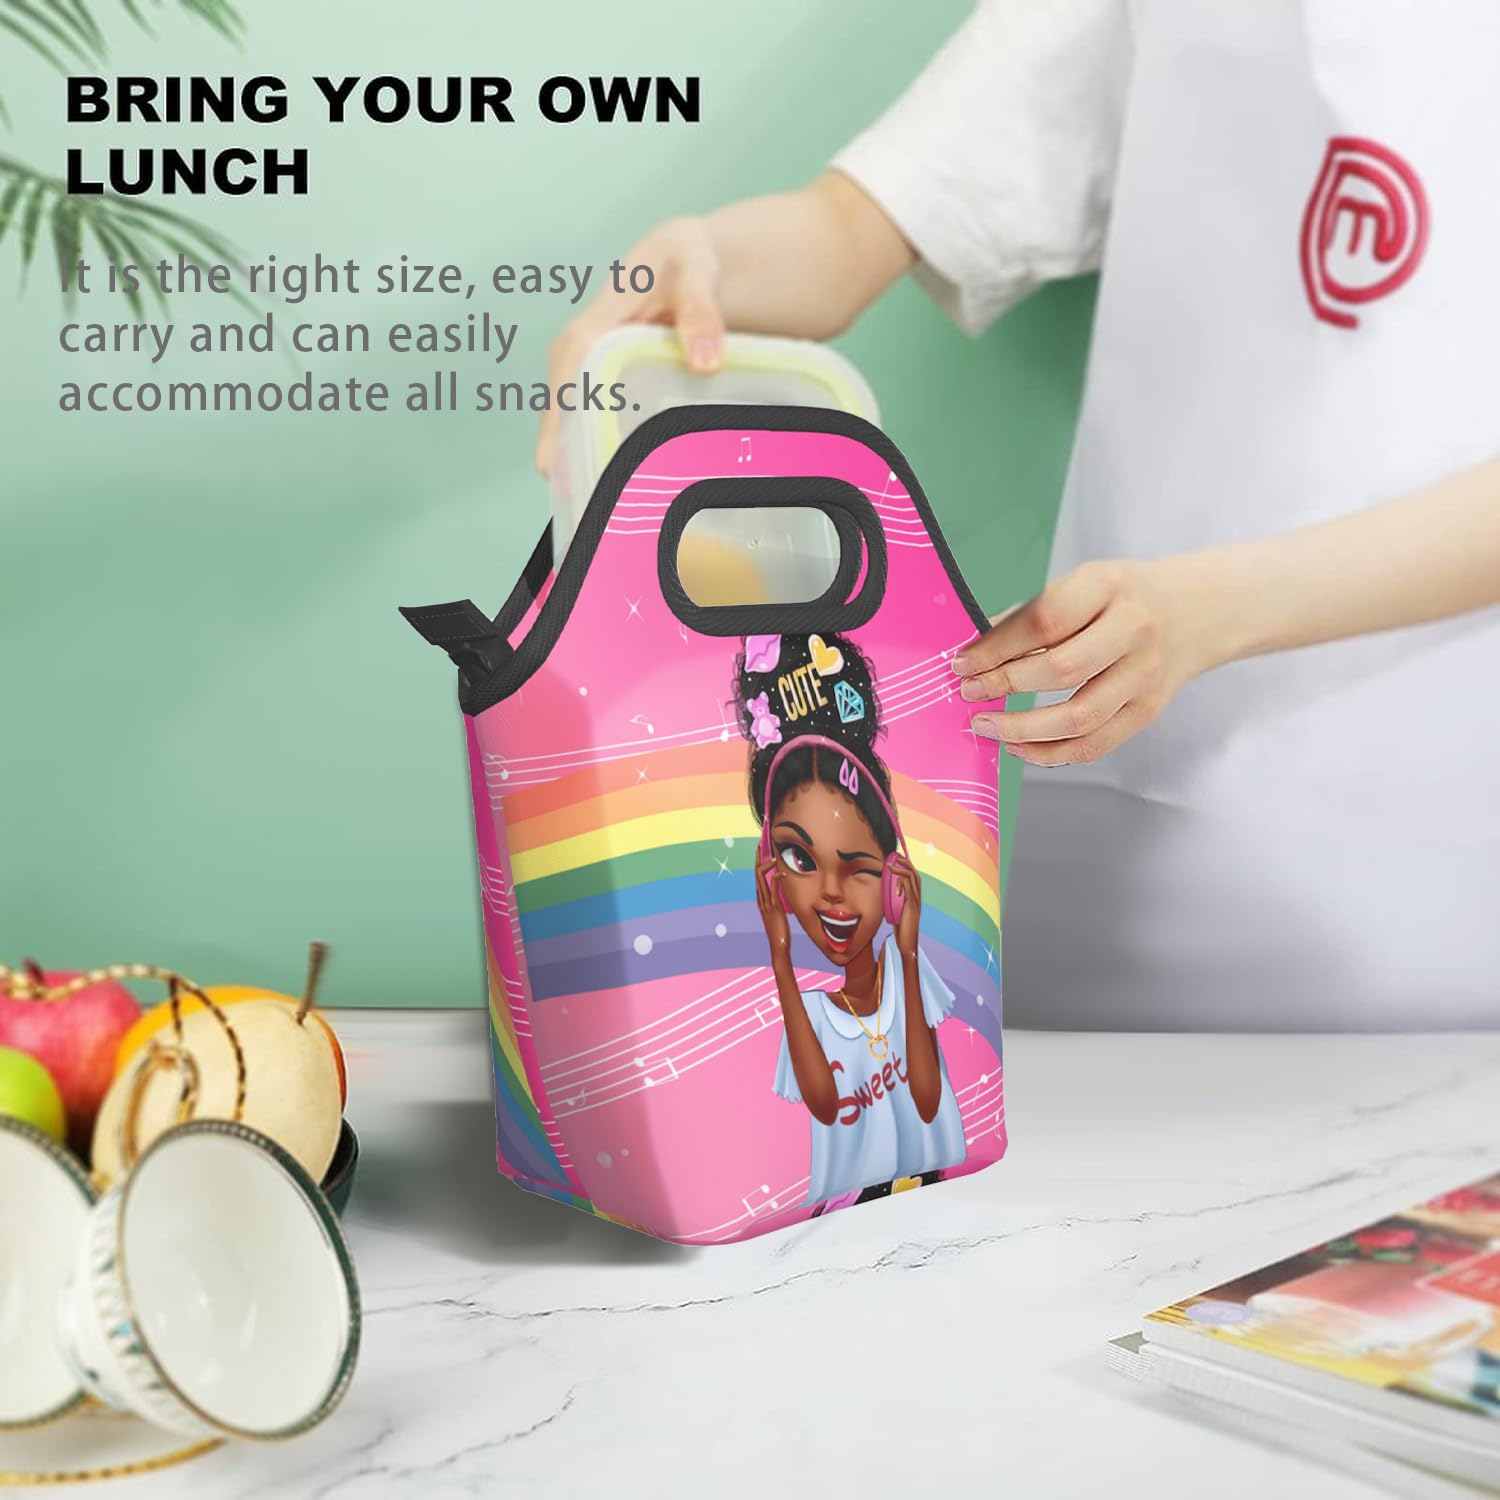 Lunch Bags For Black Women African American Lunch Box Afro Black Girl Lunch Tote Bag For Travel, Picnic, Work, School Reusable Insulated Cooler